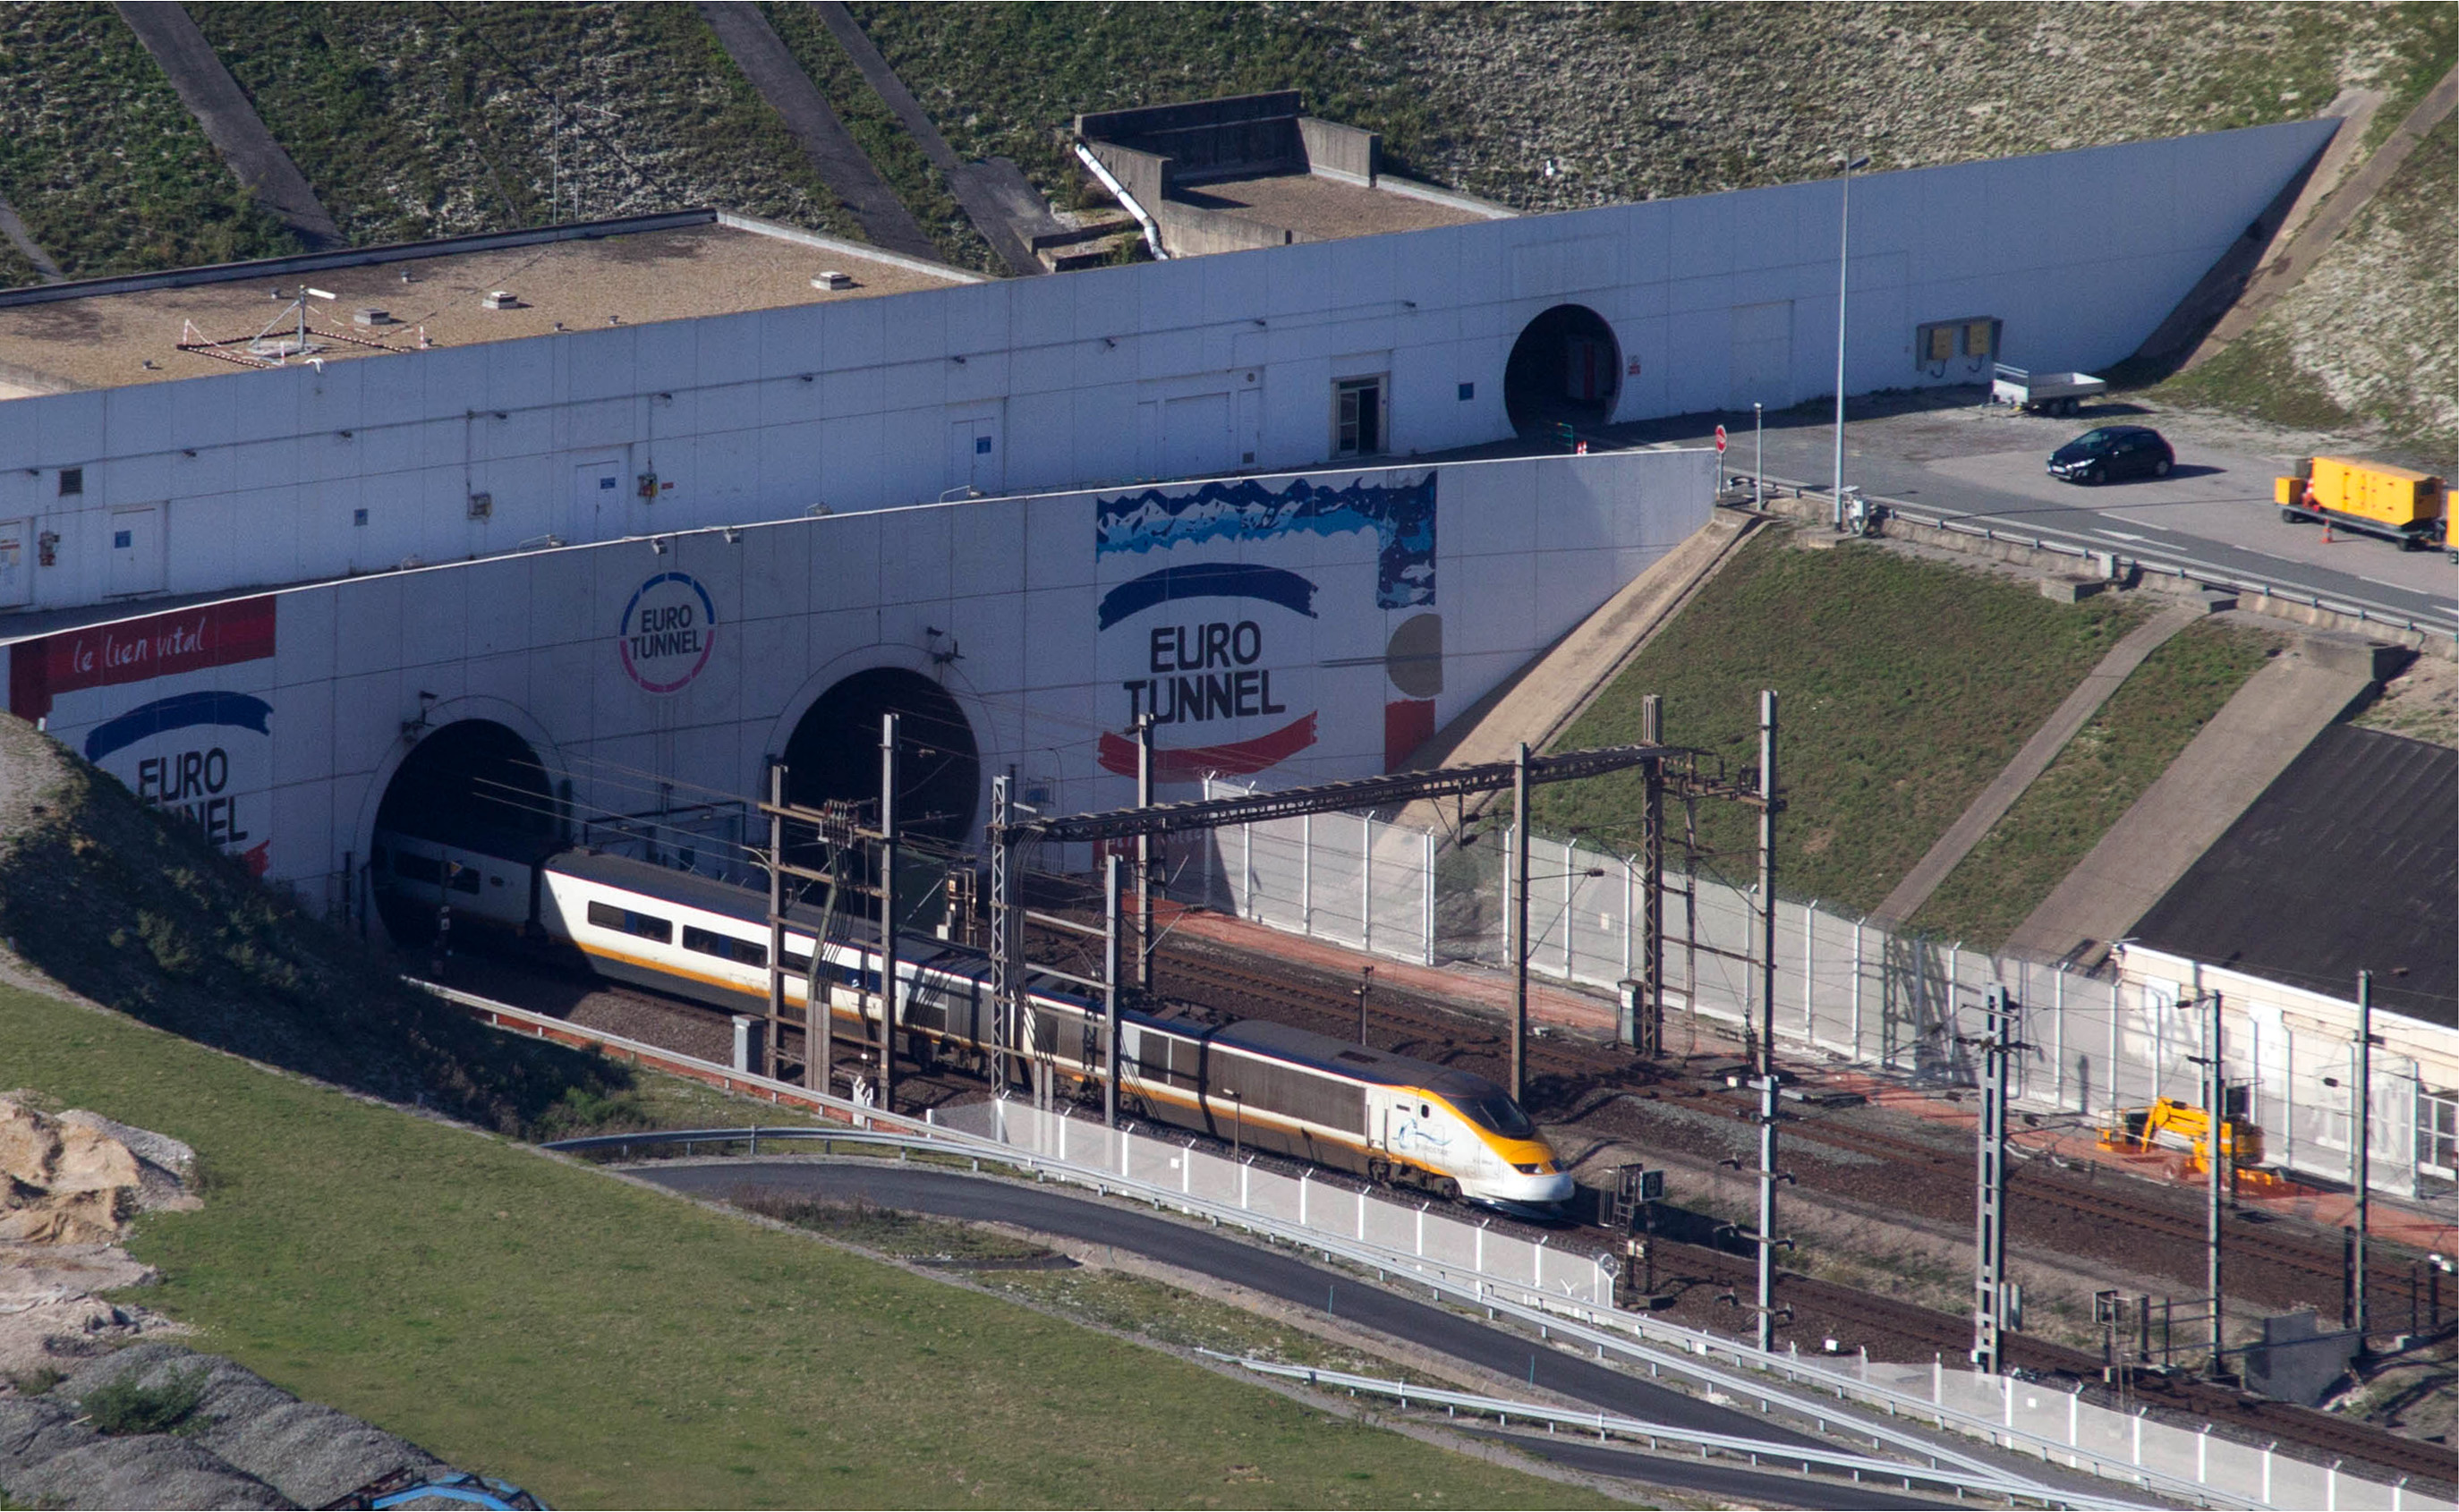 Channel tunnel